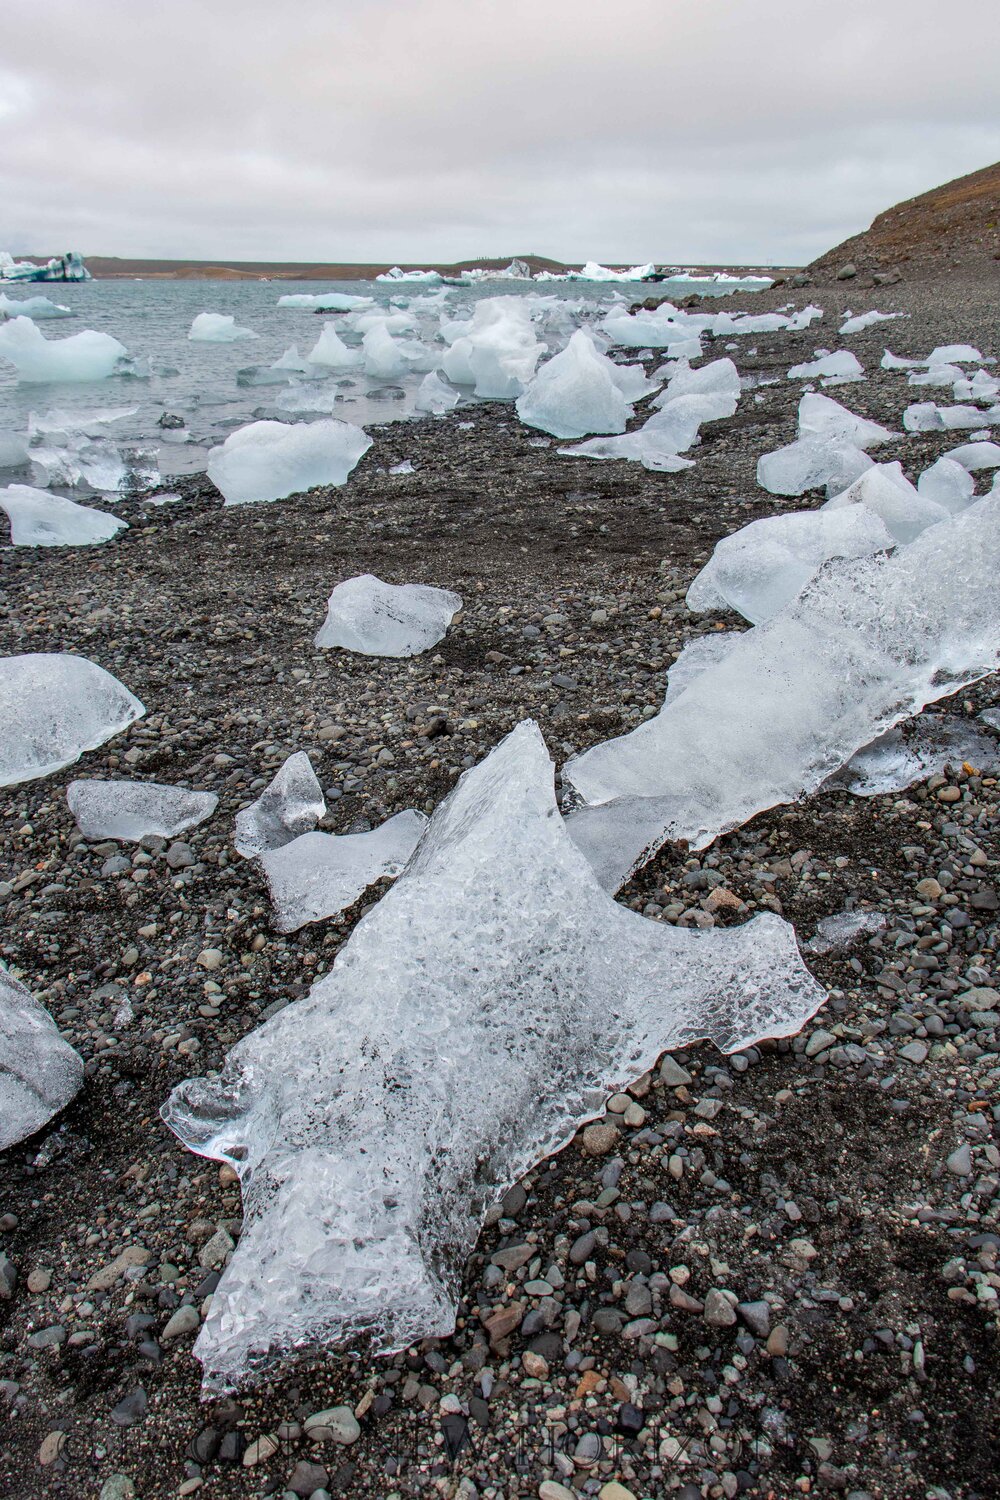  Ice chunks washed ashore at Jökulsárlón. Wonder how big these once were? 